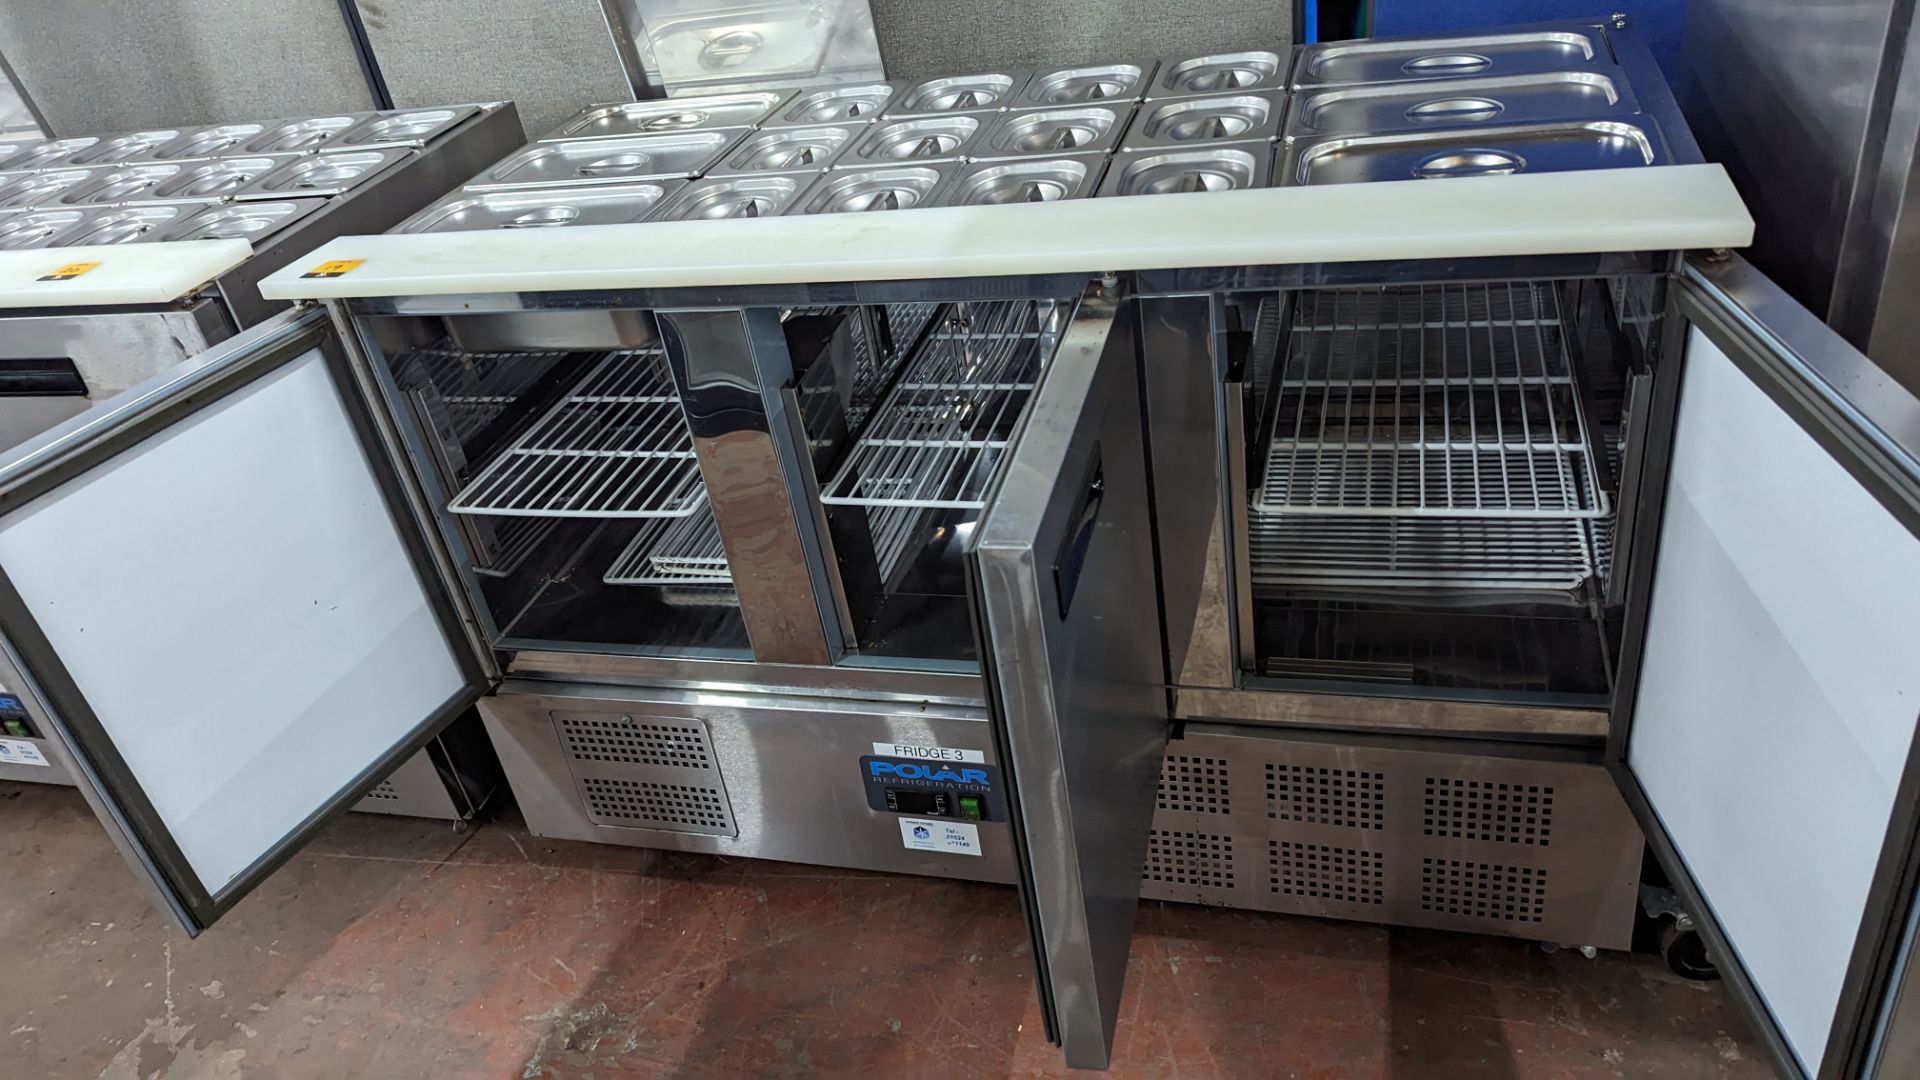 Polar stainless steel triple door refrigerated cabinet with large saladette unit built into the top, - Image 8 of 9